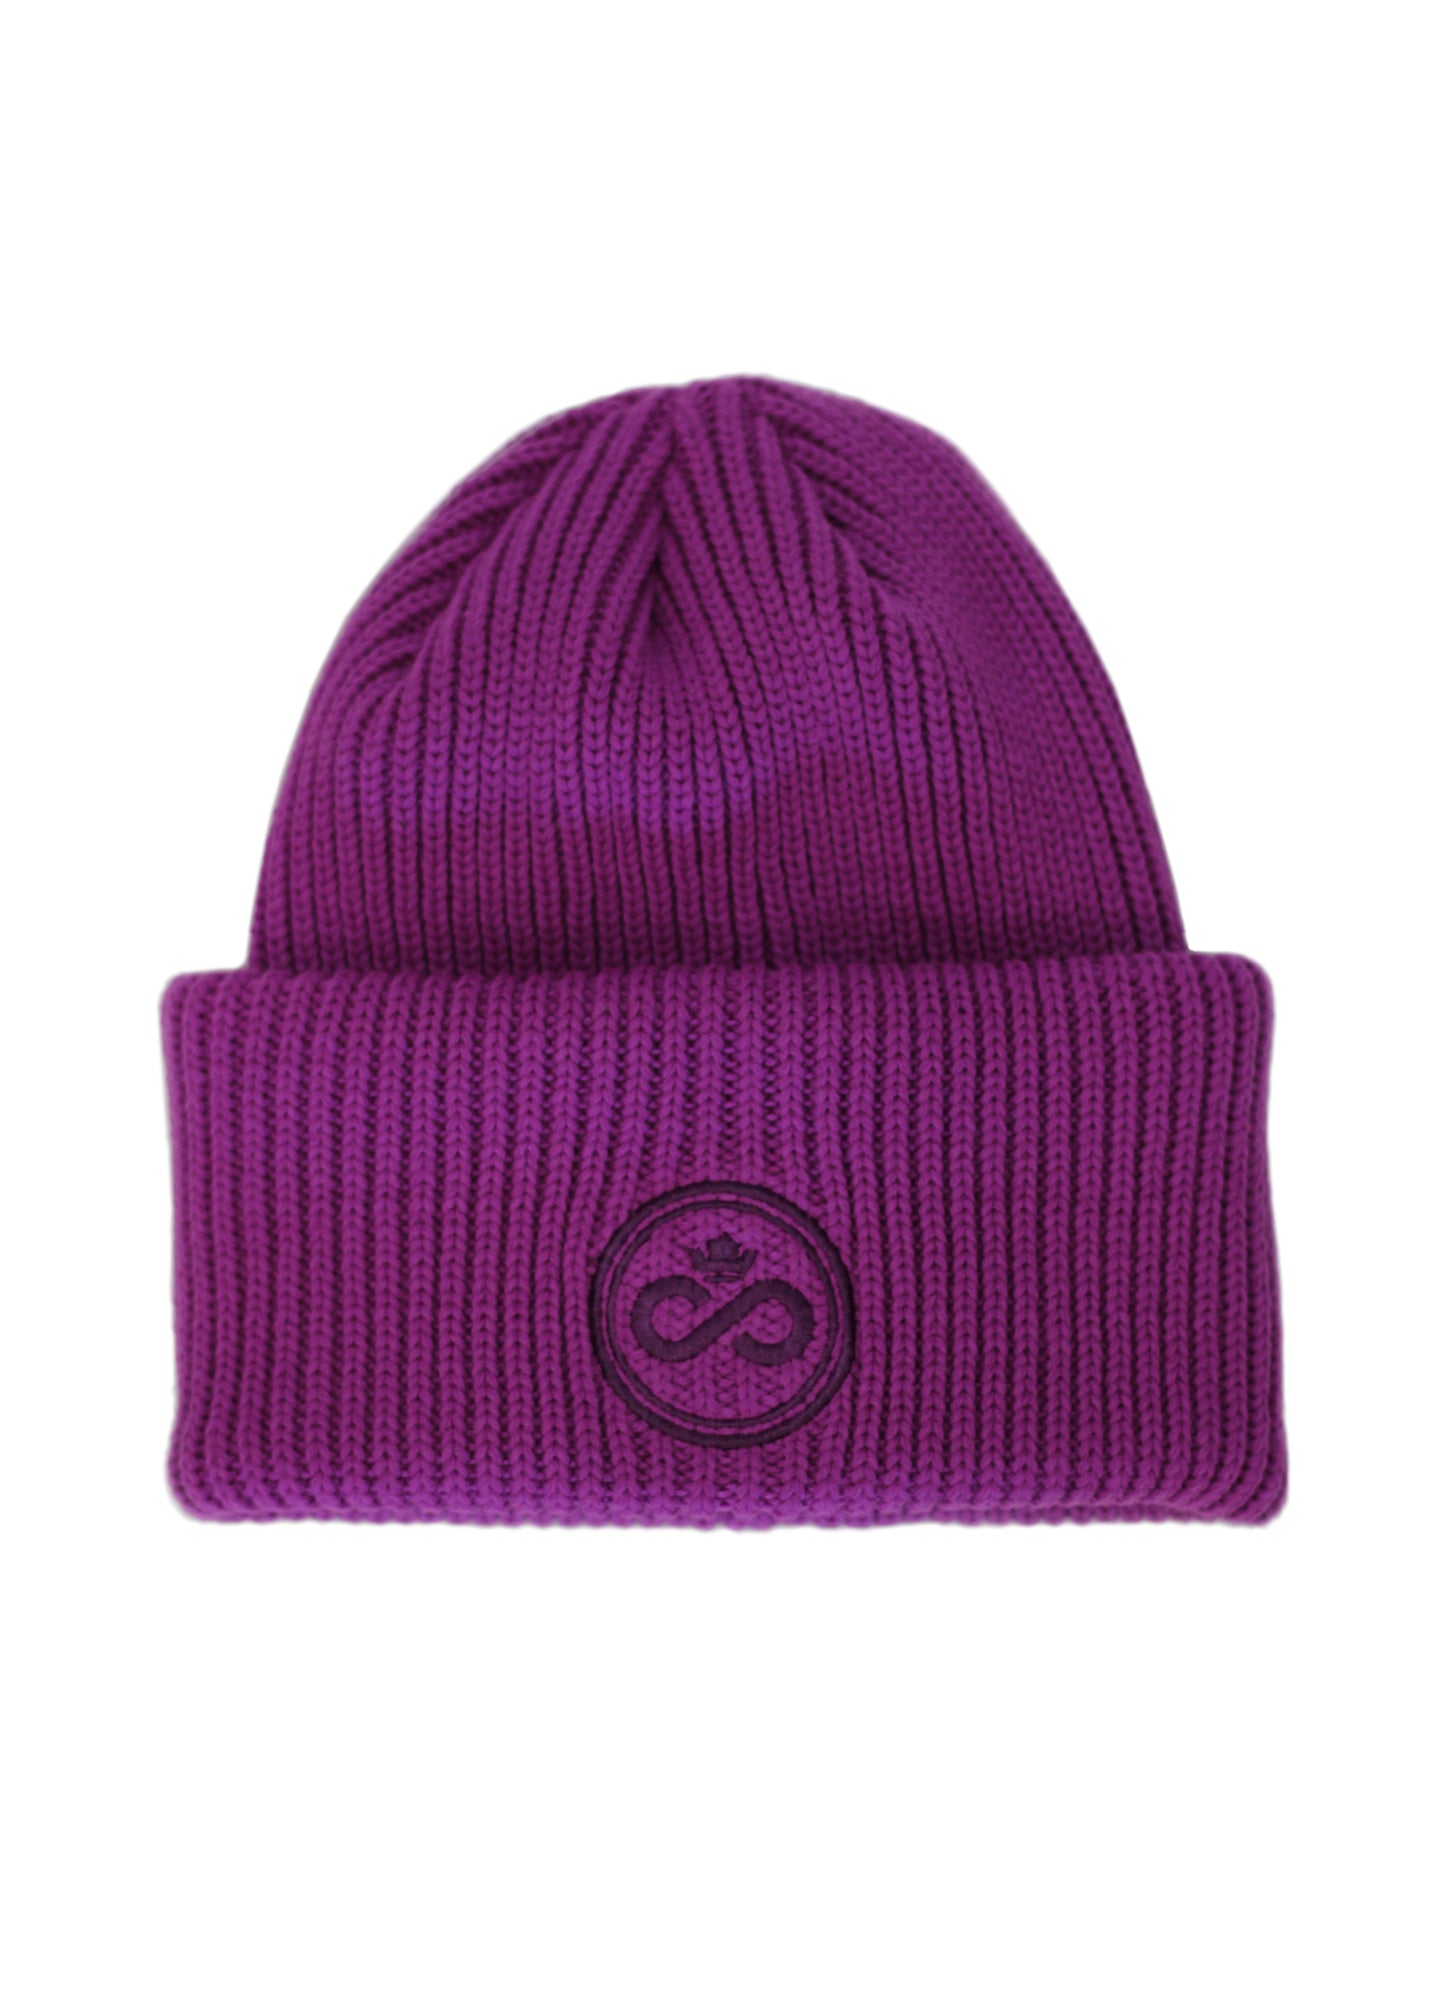 Tuque sorbet Nomade - taille adulte